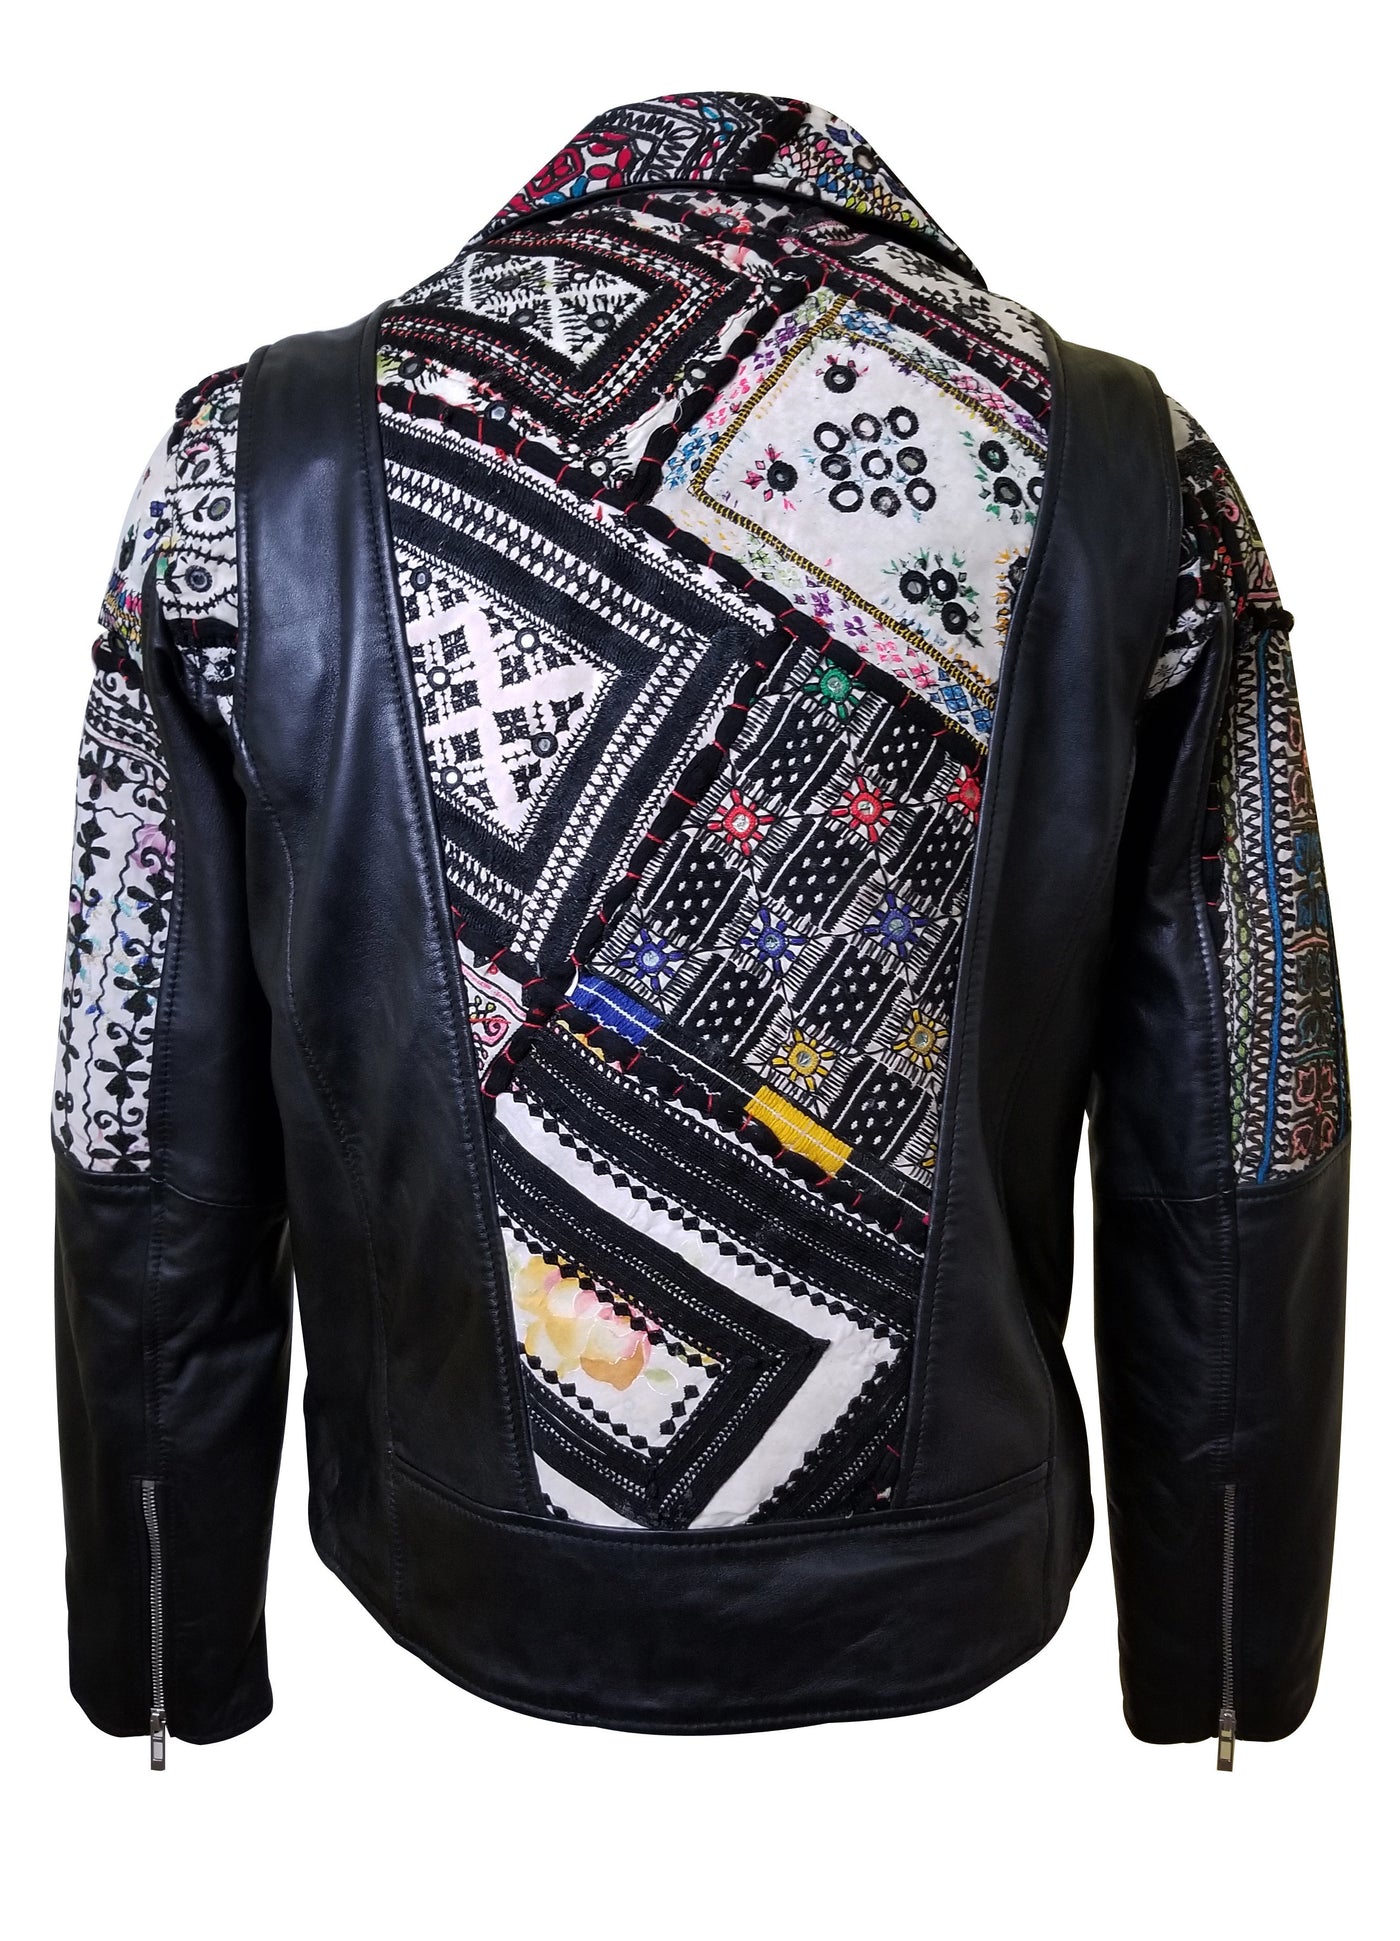 Soft Hand Embroidered Fabric Bohemian Leather Jacket